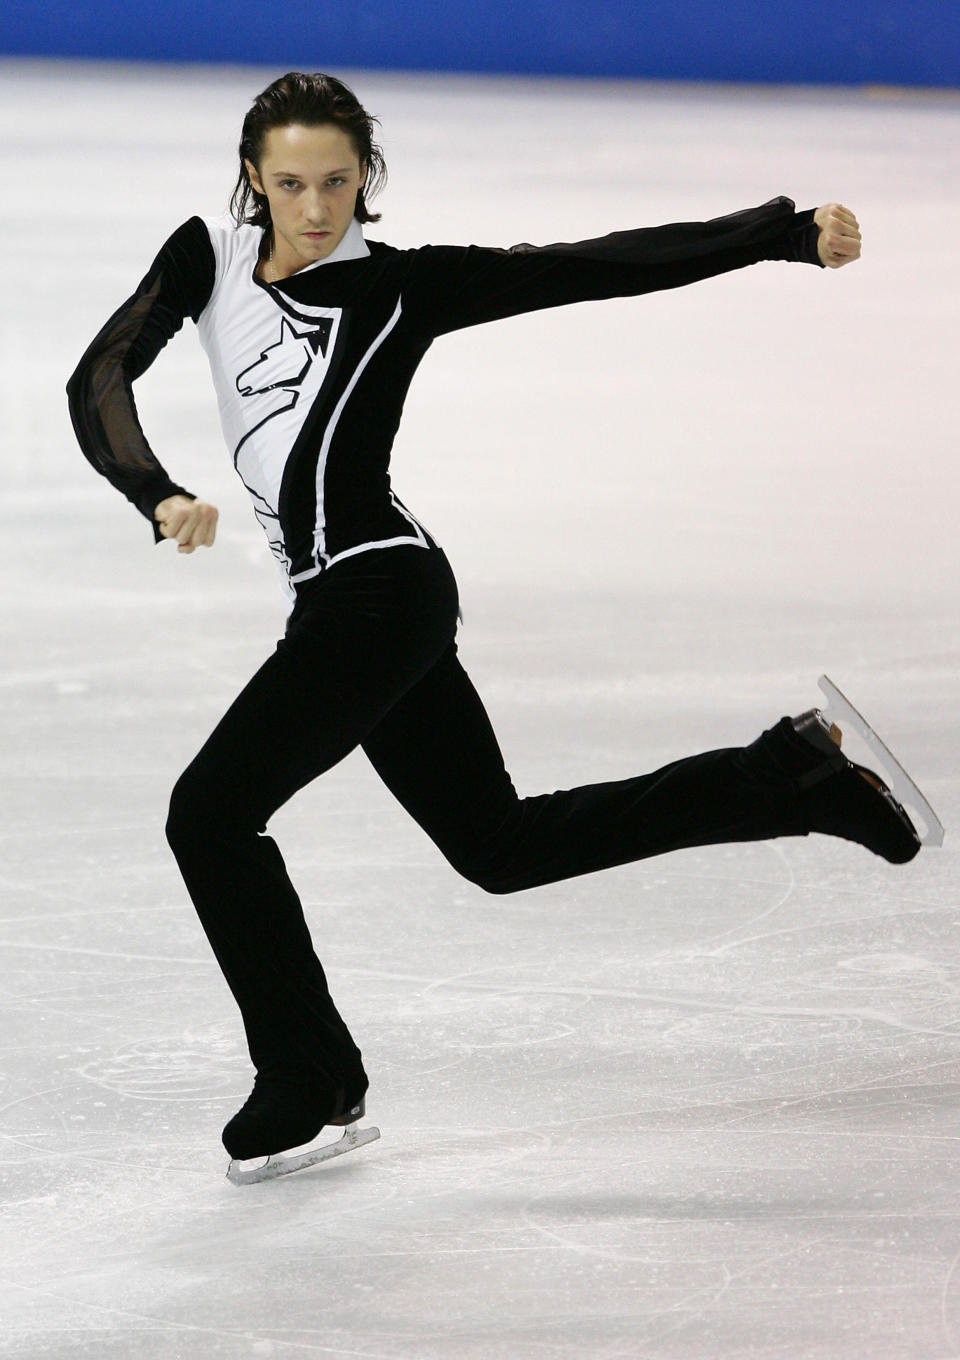 Performing&nbsp;in the&nbsp;men's short program competition on day two of Skate Canada on Nov. 3, 2006, in Victoria, Canada.